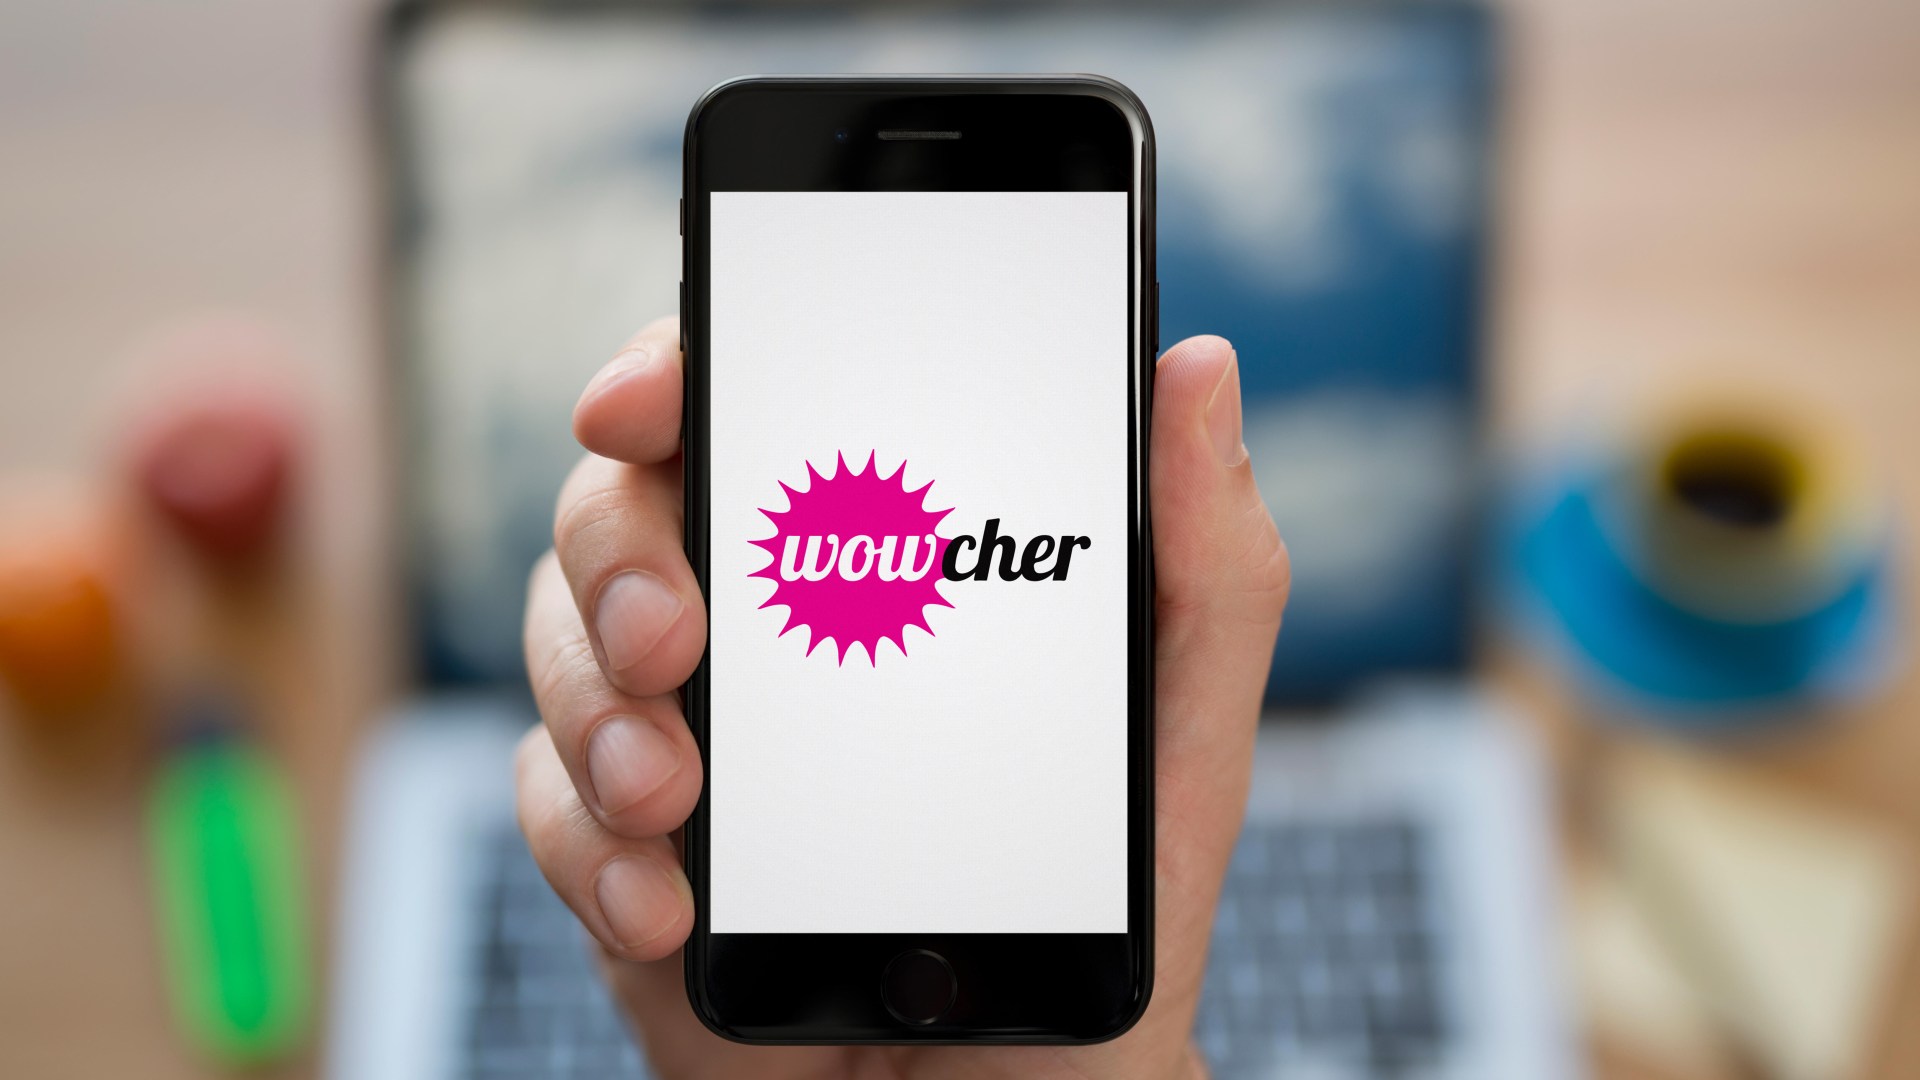 Wowcher to refund 870,000 share of 4m for misleading sales practices – see if youre affected [Video]